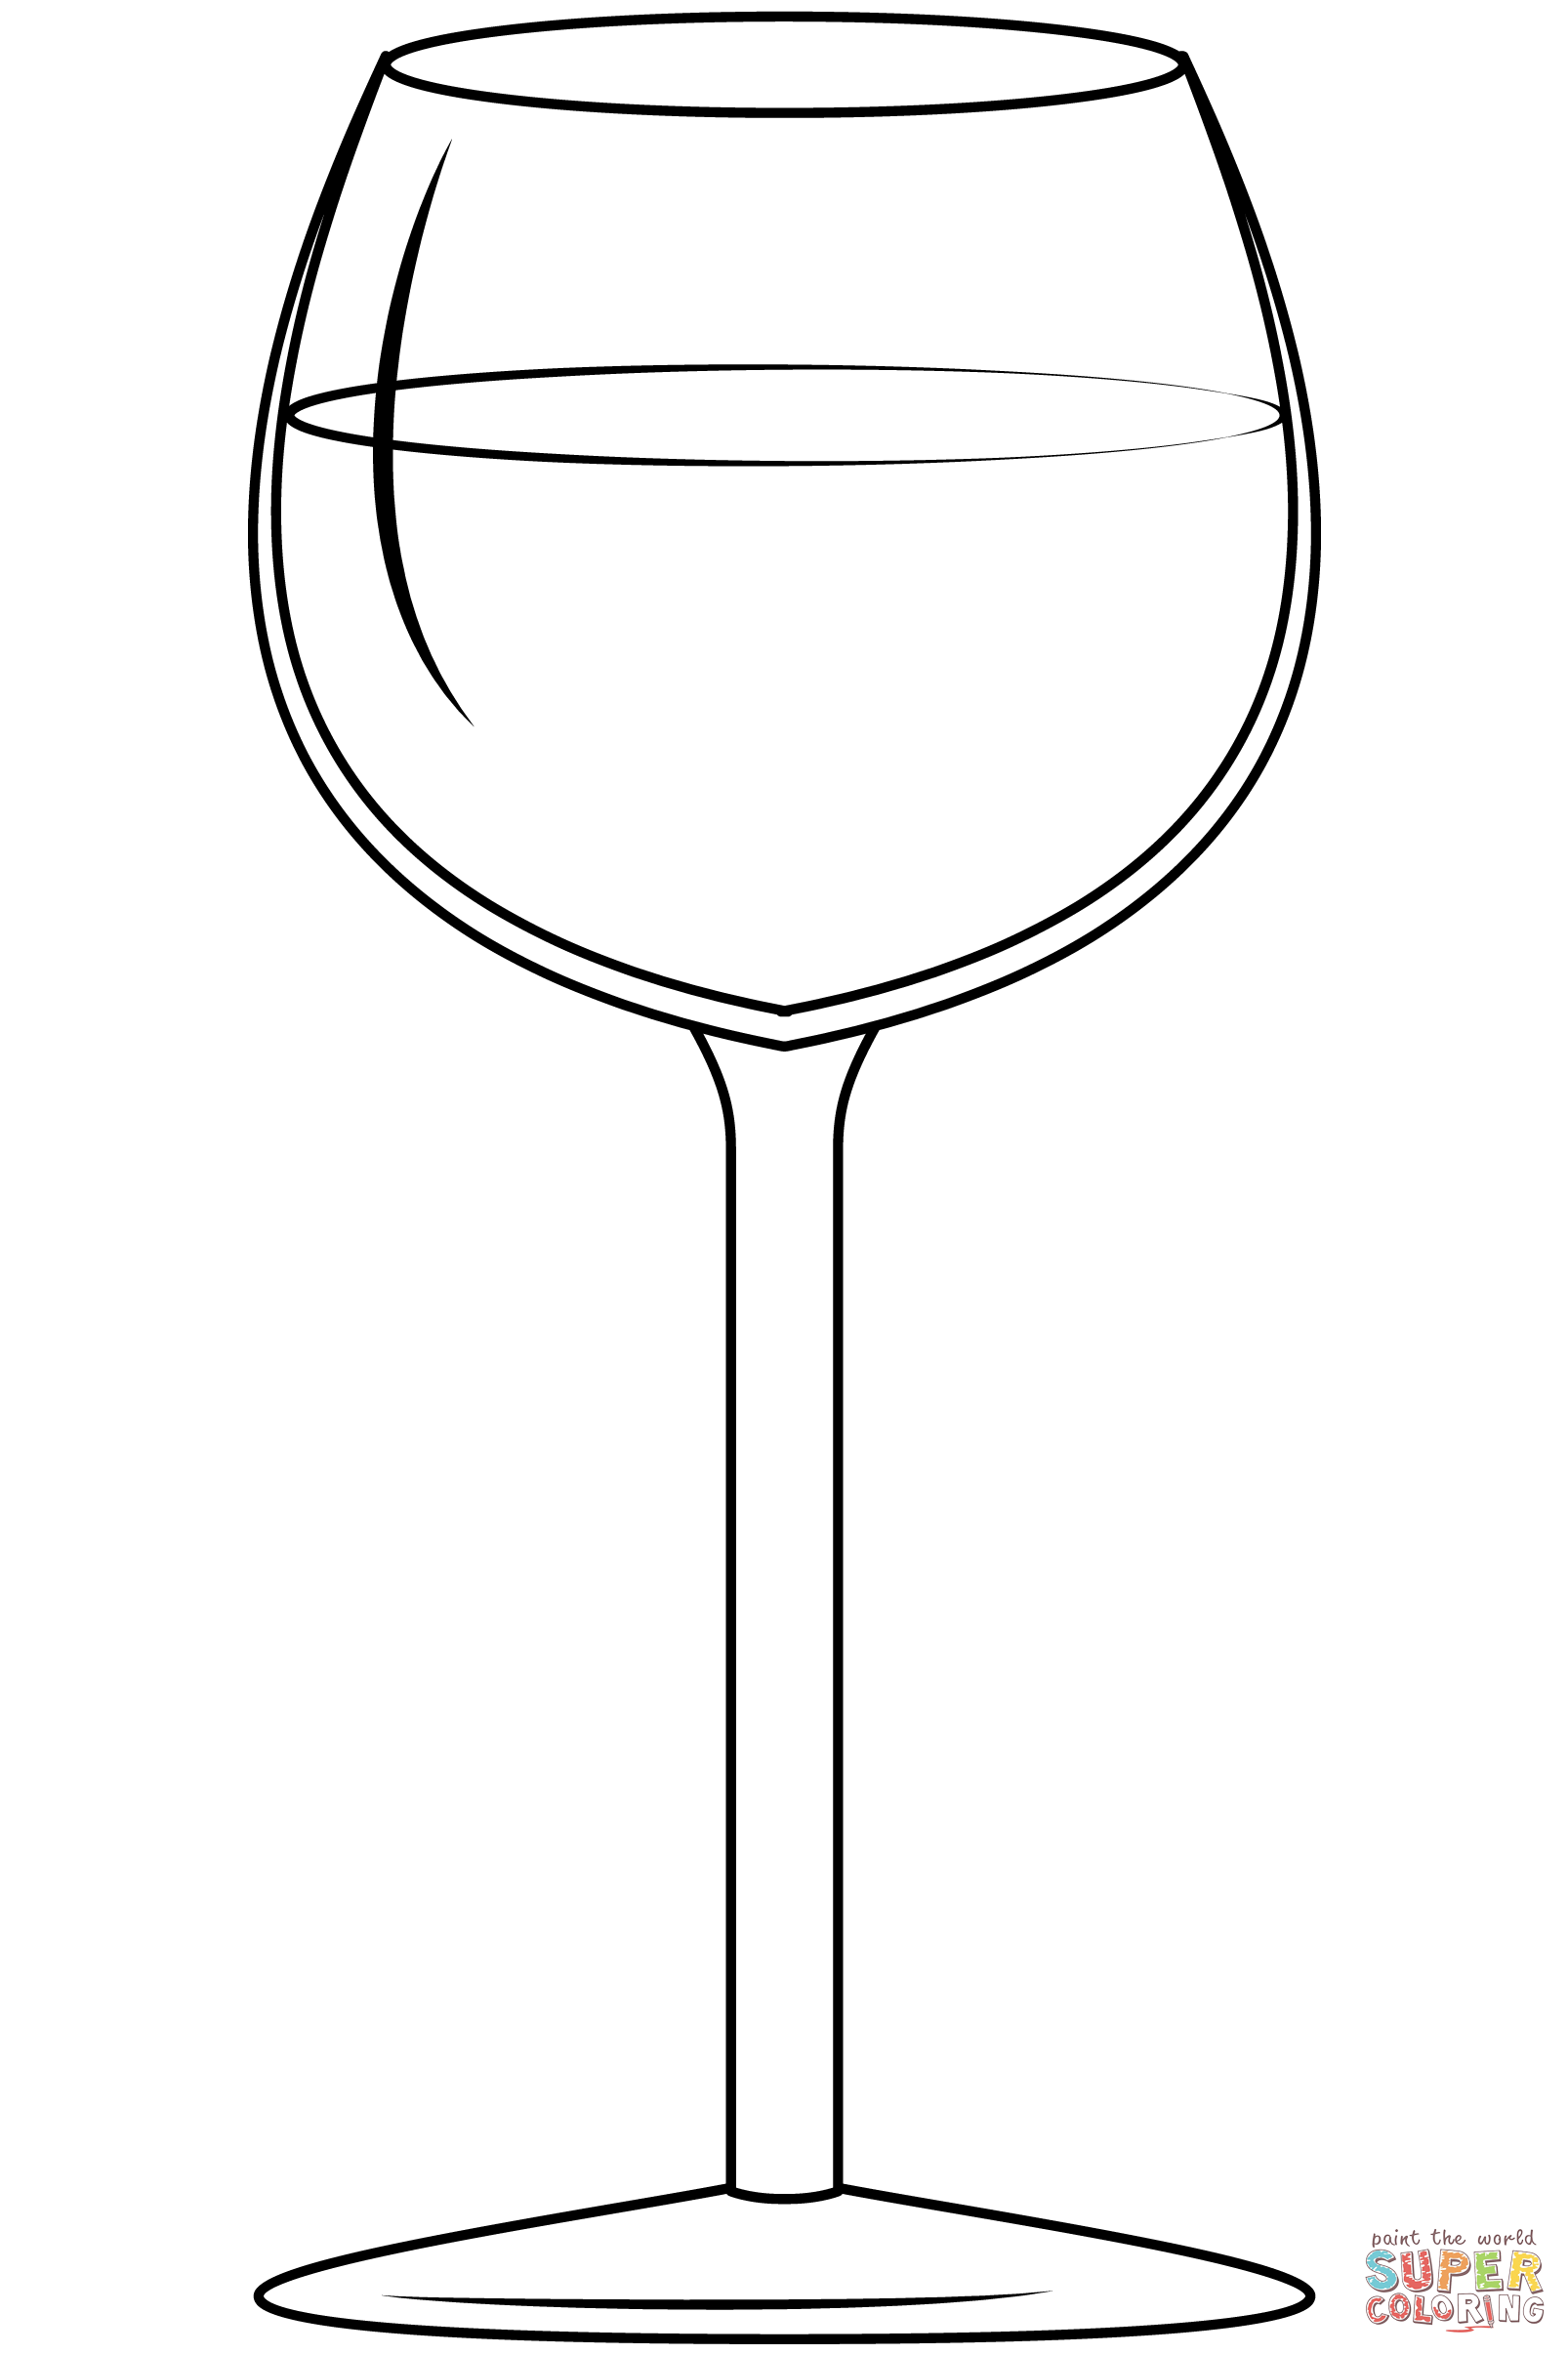 Wine glass coloring page free printable coloring pages